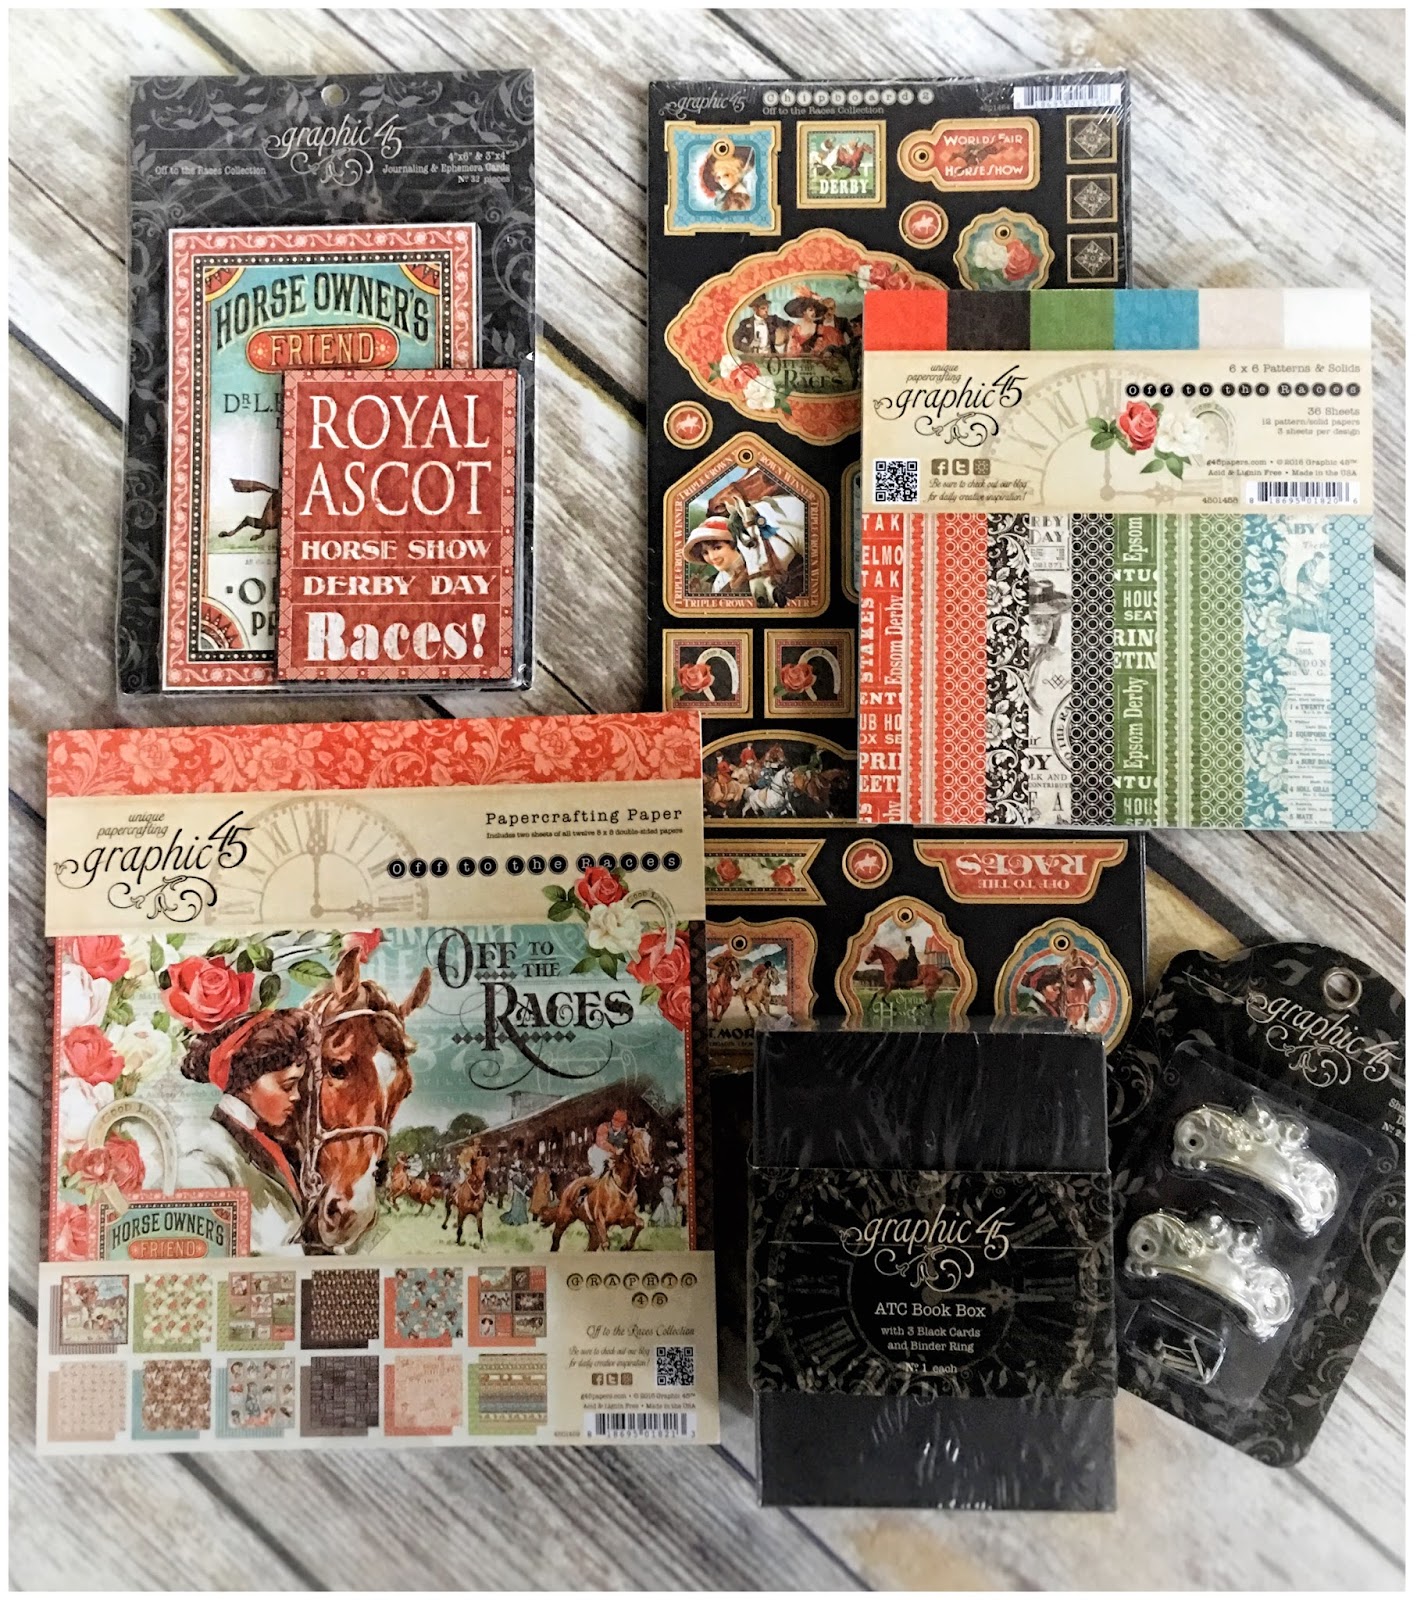 (FB prize April 14) Off to the Races, ATC Book Box, Metal Prize $40 Graphic 45